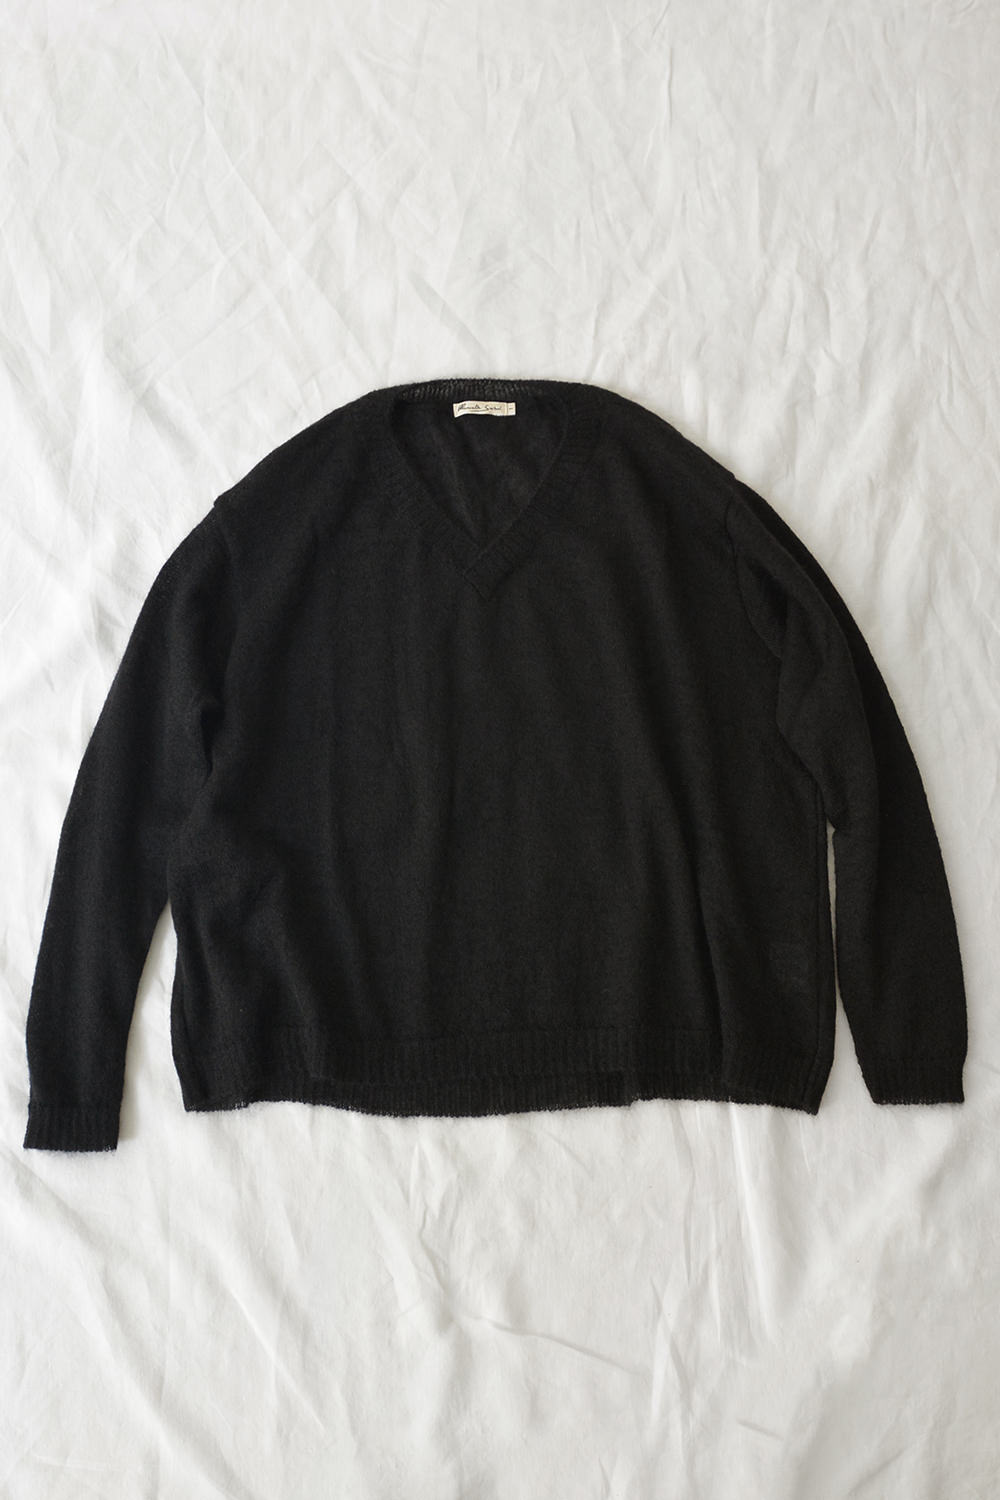 manuelle guibal oversized sweater black top picture